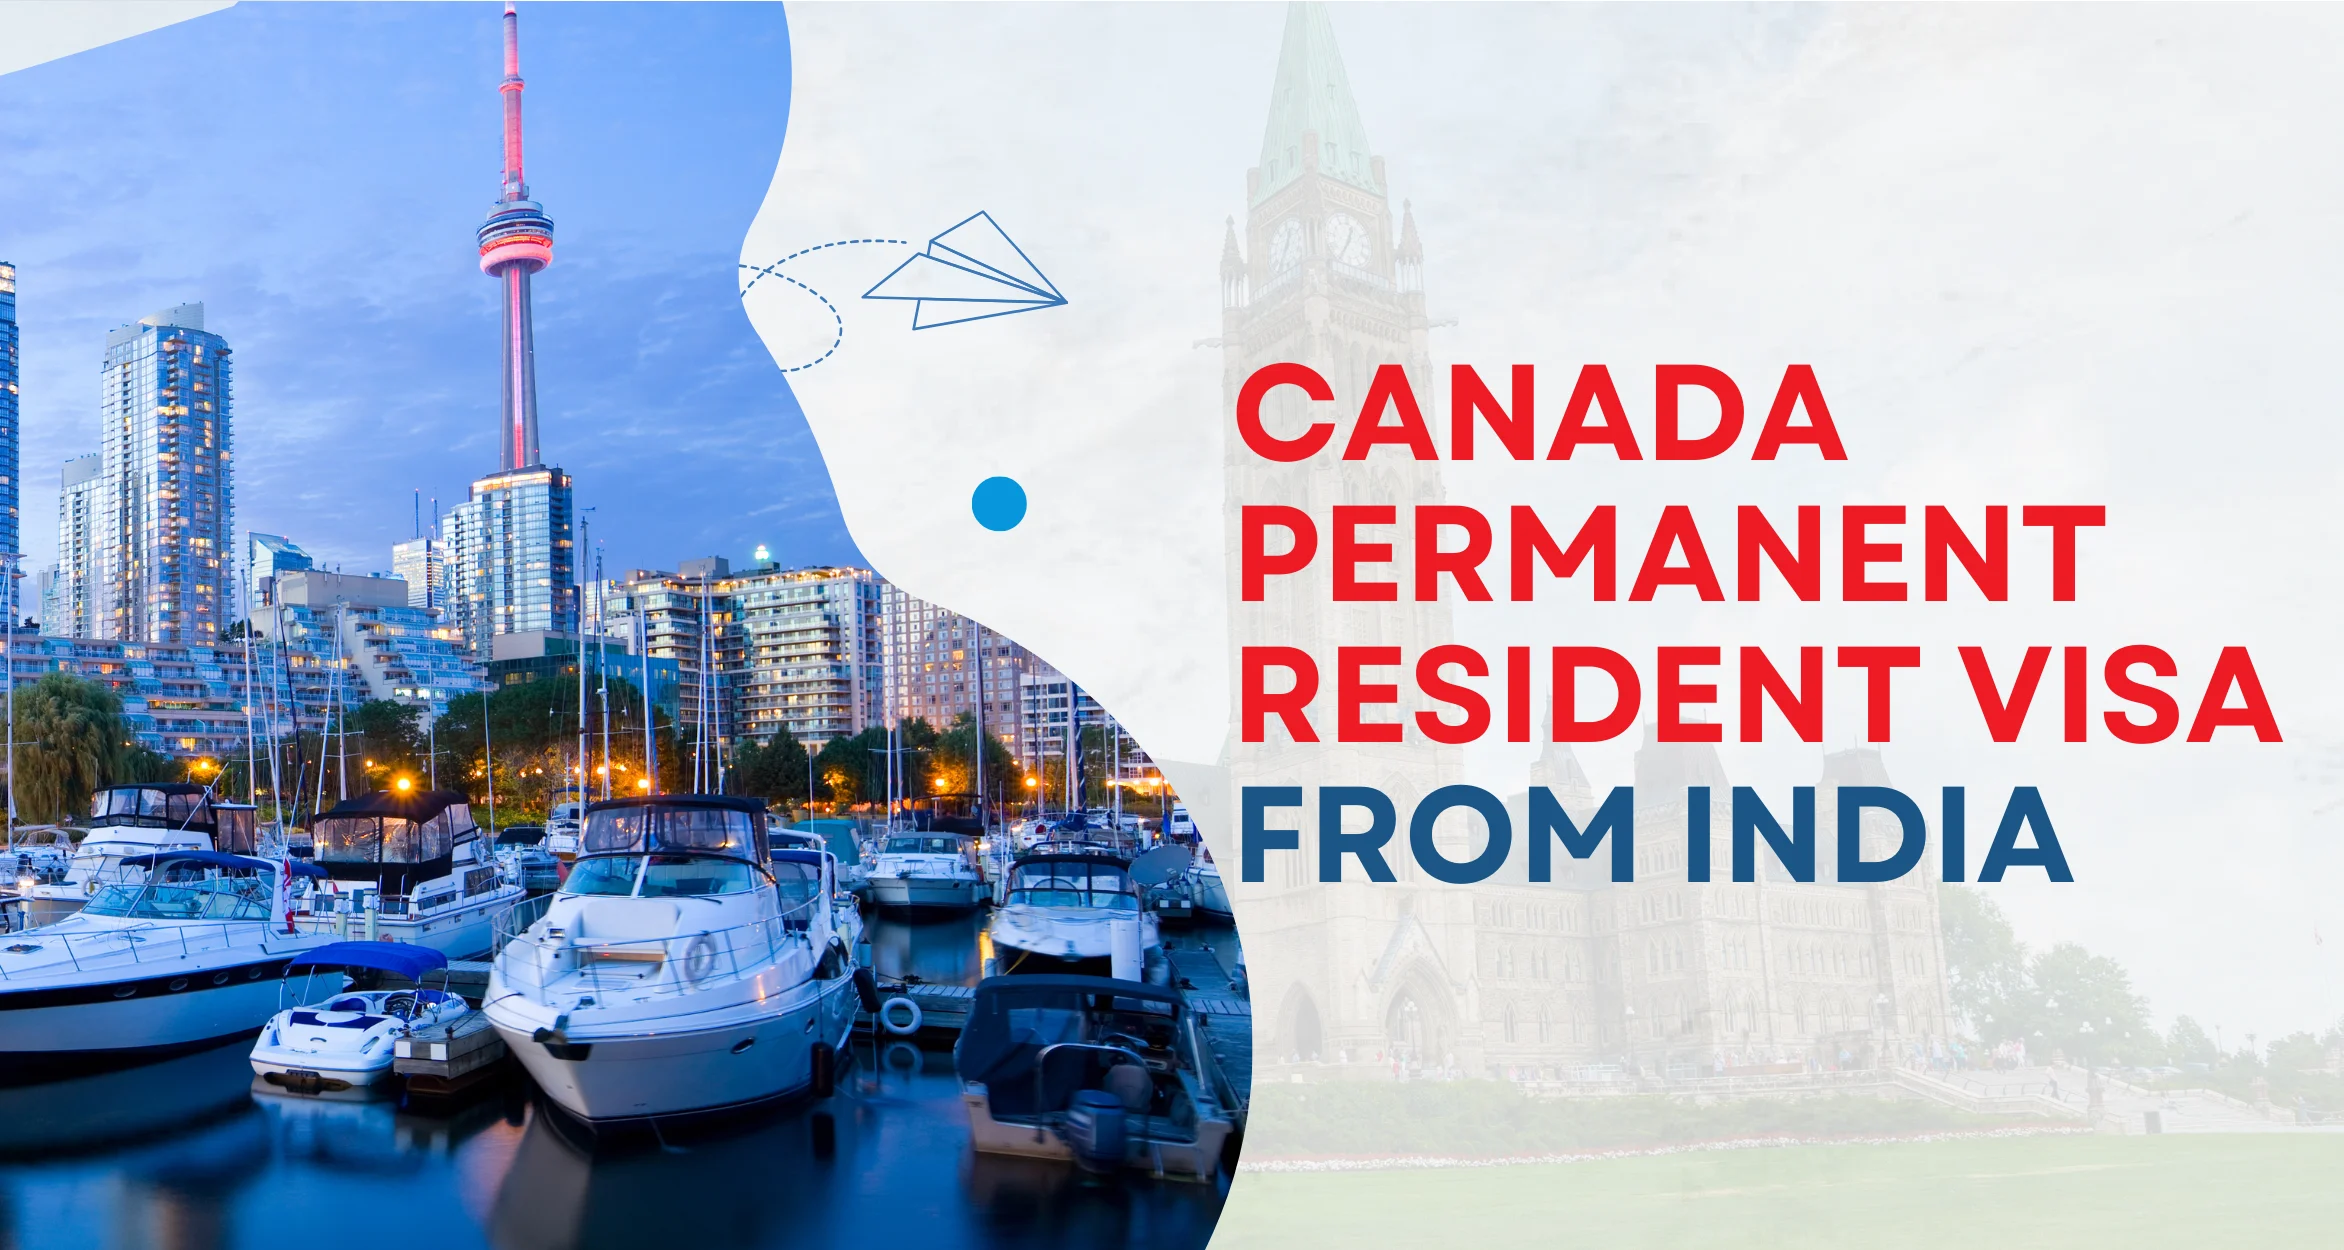 Canada Permanent Resident visa from India